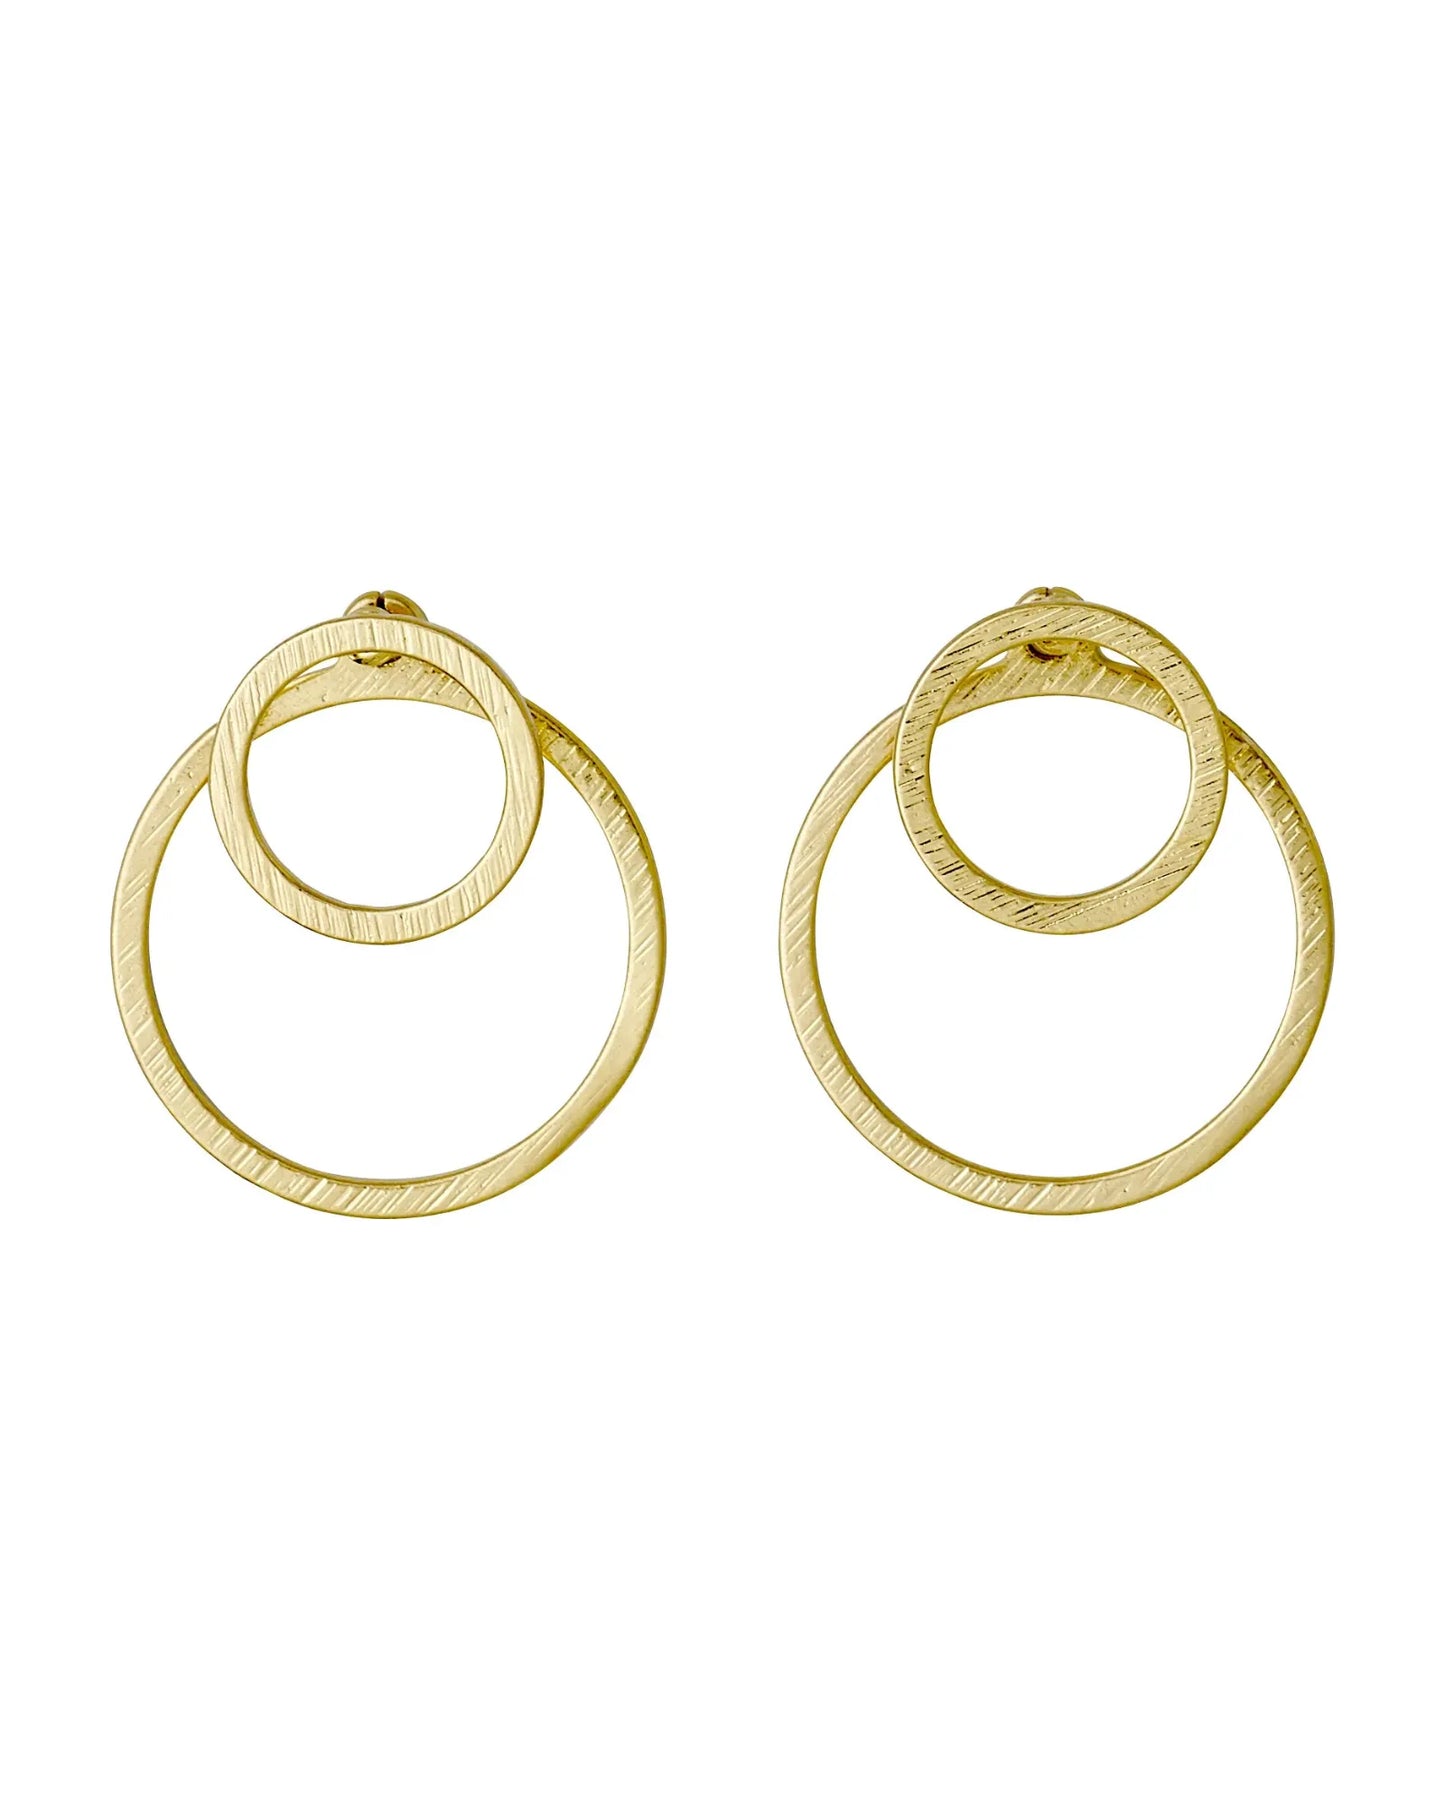 ZOOEY Recycled 2-in-1 Earrings - Gold Plated